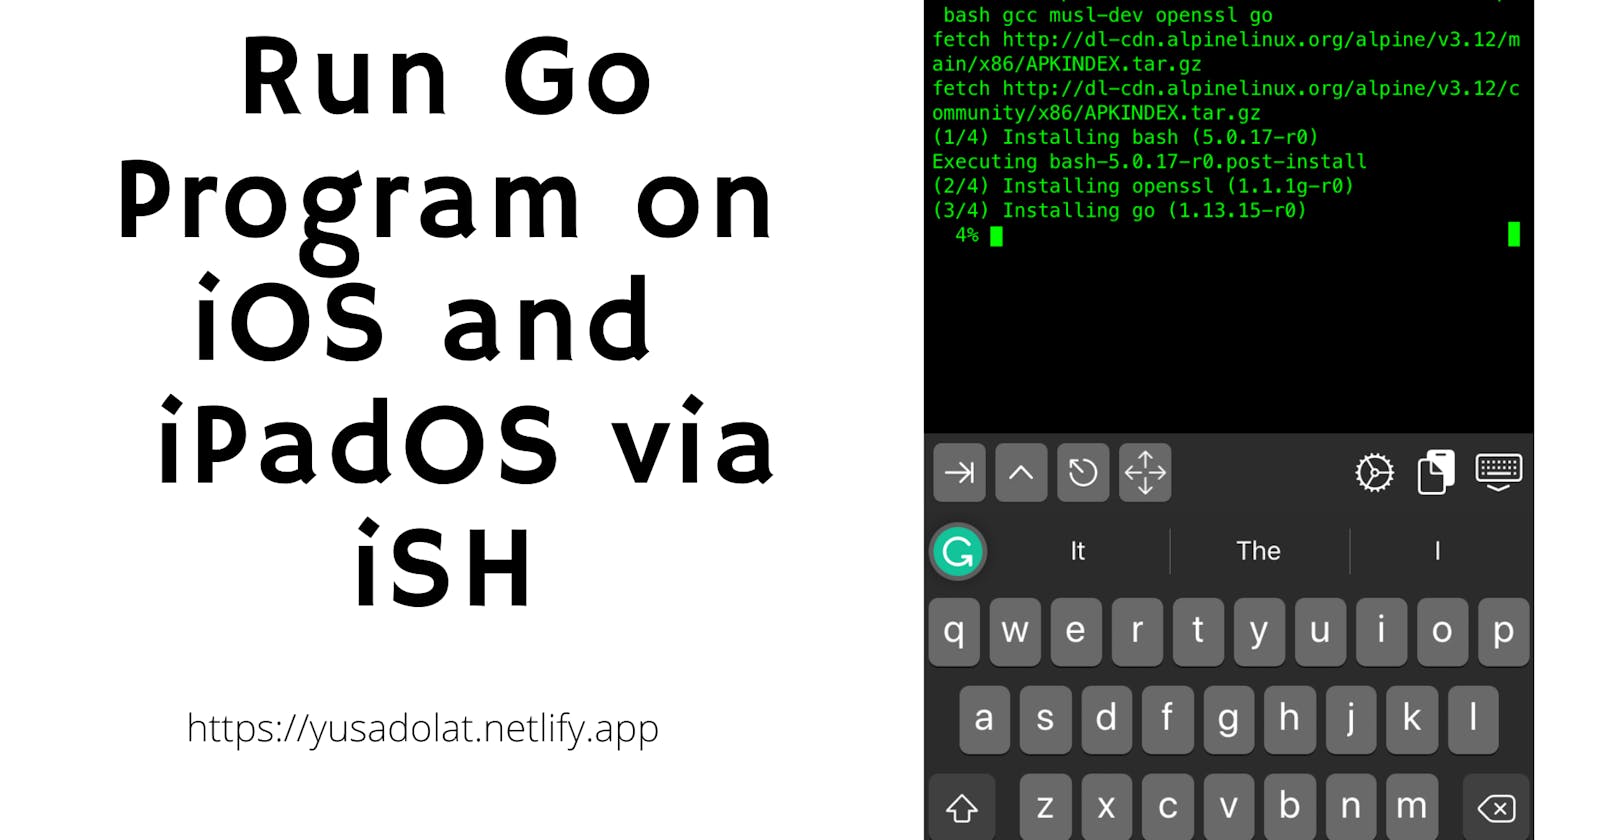 Running Go Program on iOS and iPadOS with iSH